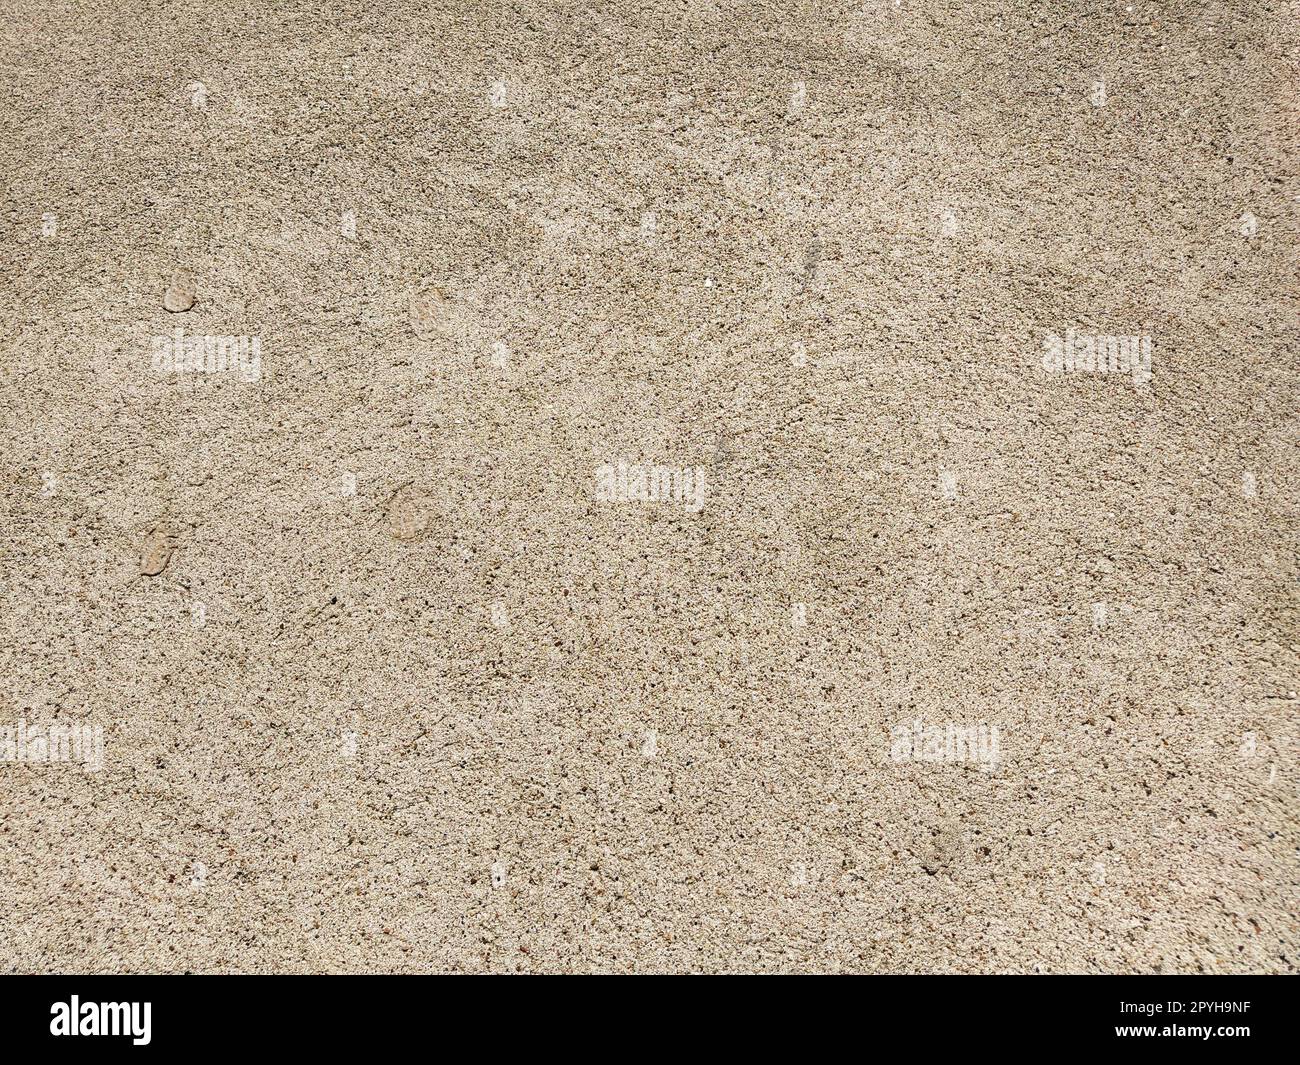 Concrete surface with multi-colored blotches of small stones. Light beige tone. Wall of a building or concrete slab. Close-up. Pockmarked cement surface. Interior option Stock Photo